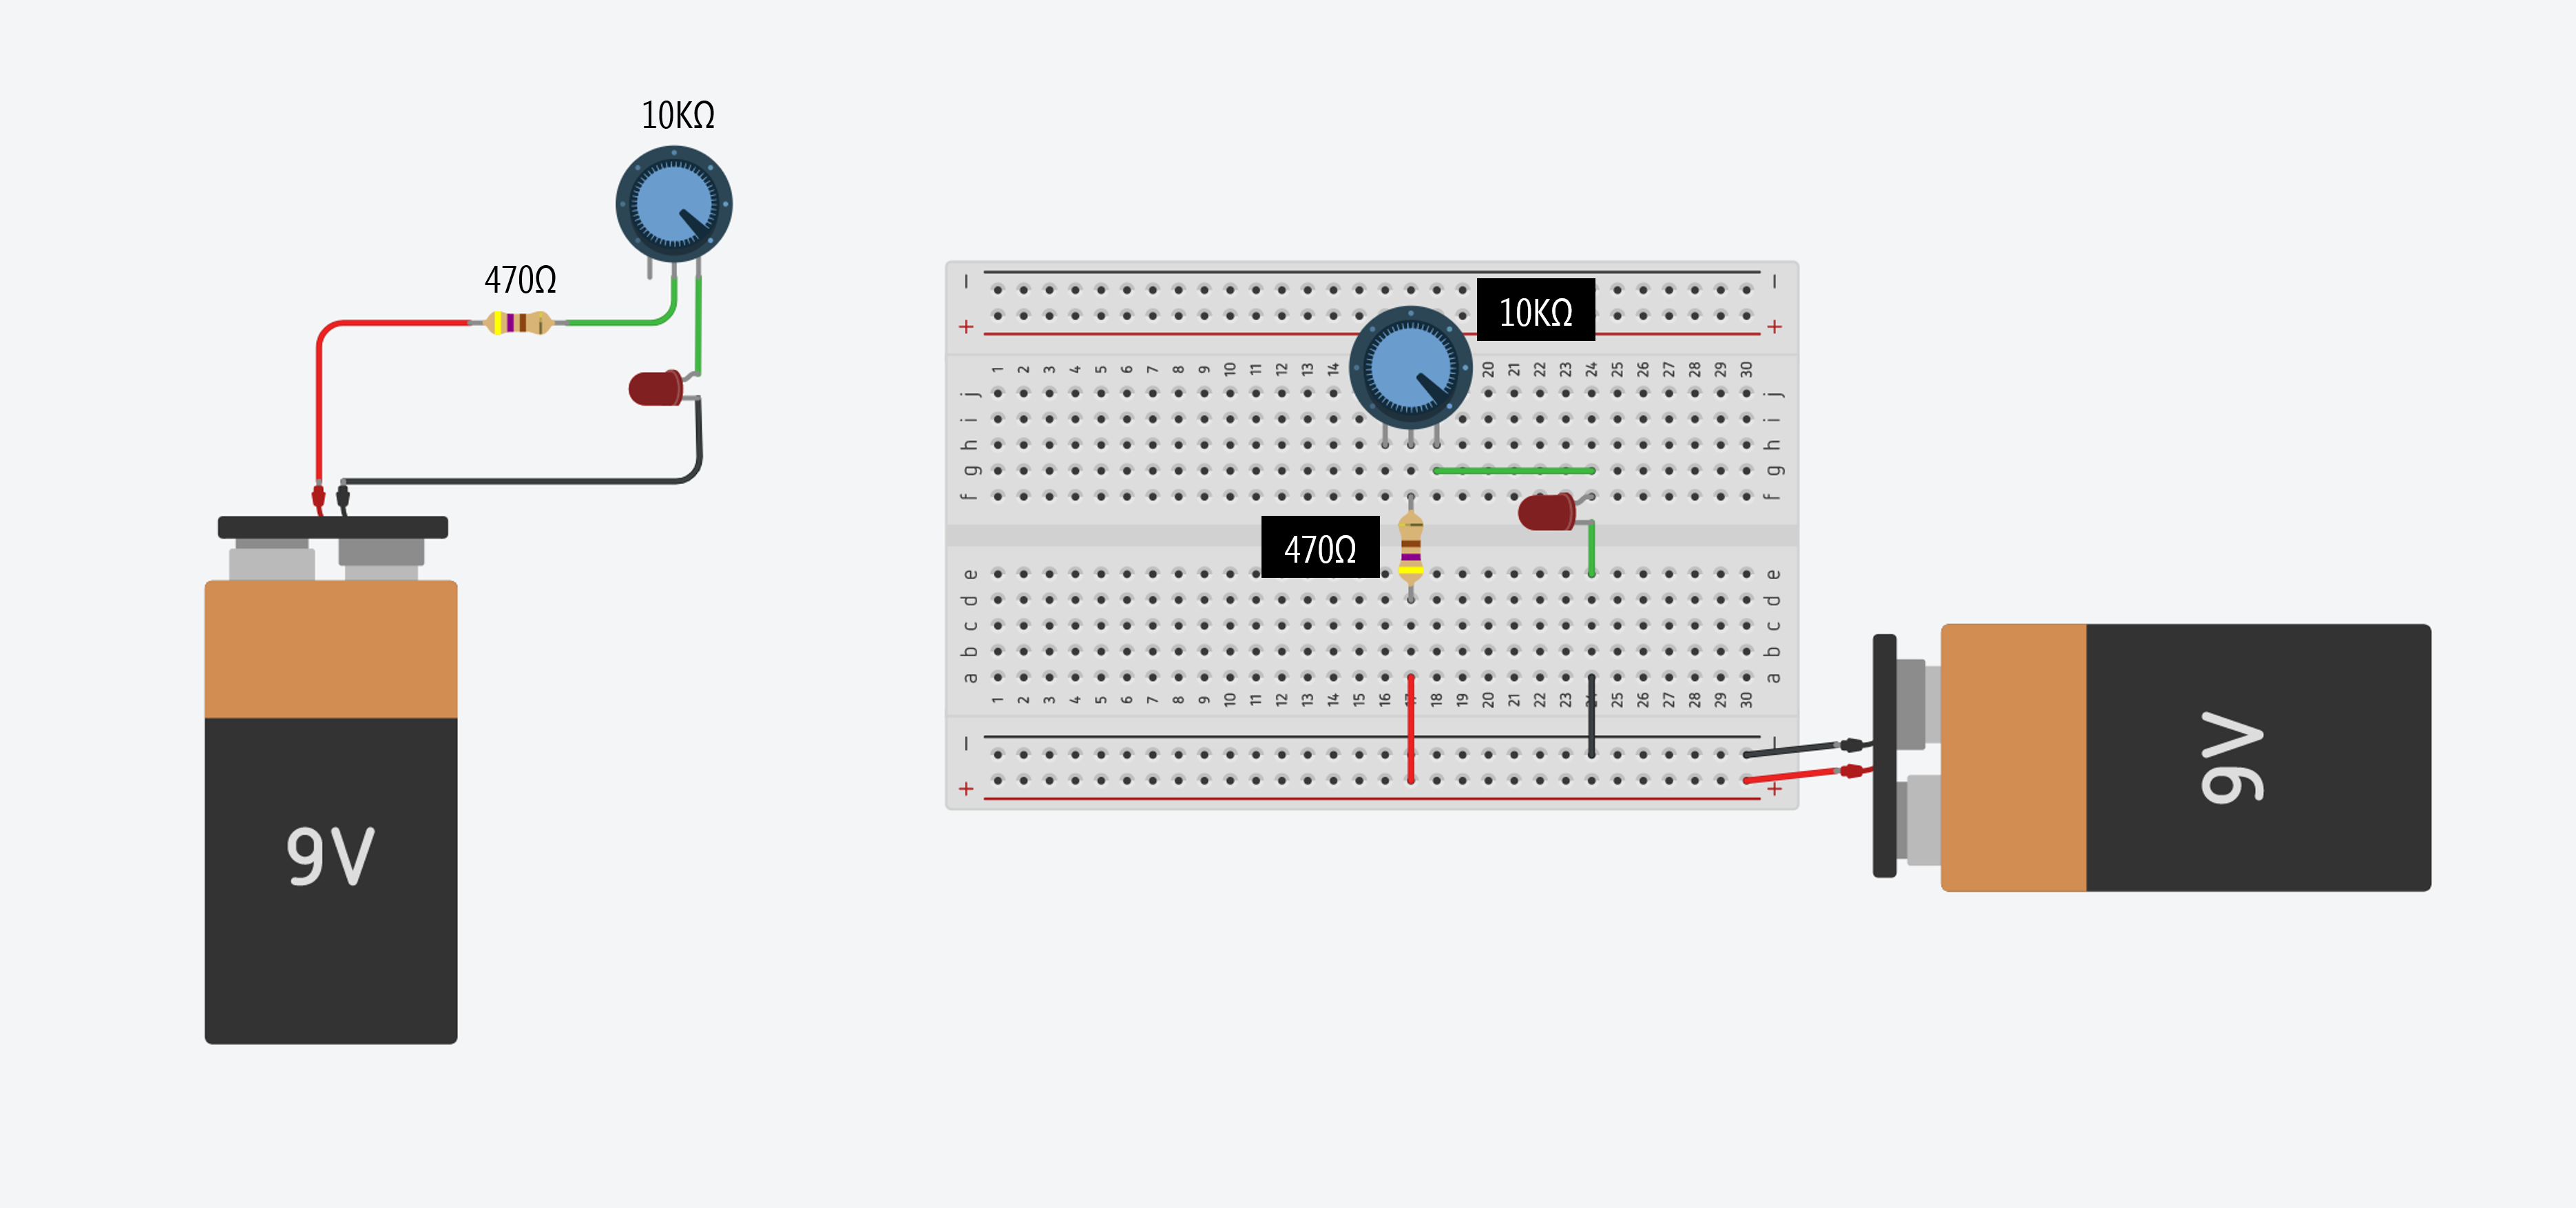 Wiring diagram of an LED-based circuit with a potentiometer for fading. 9V battery used for power